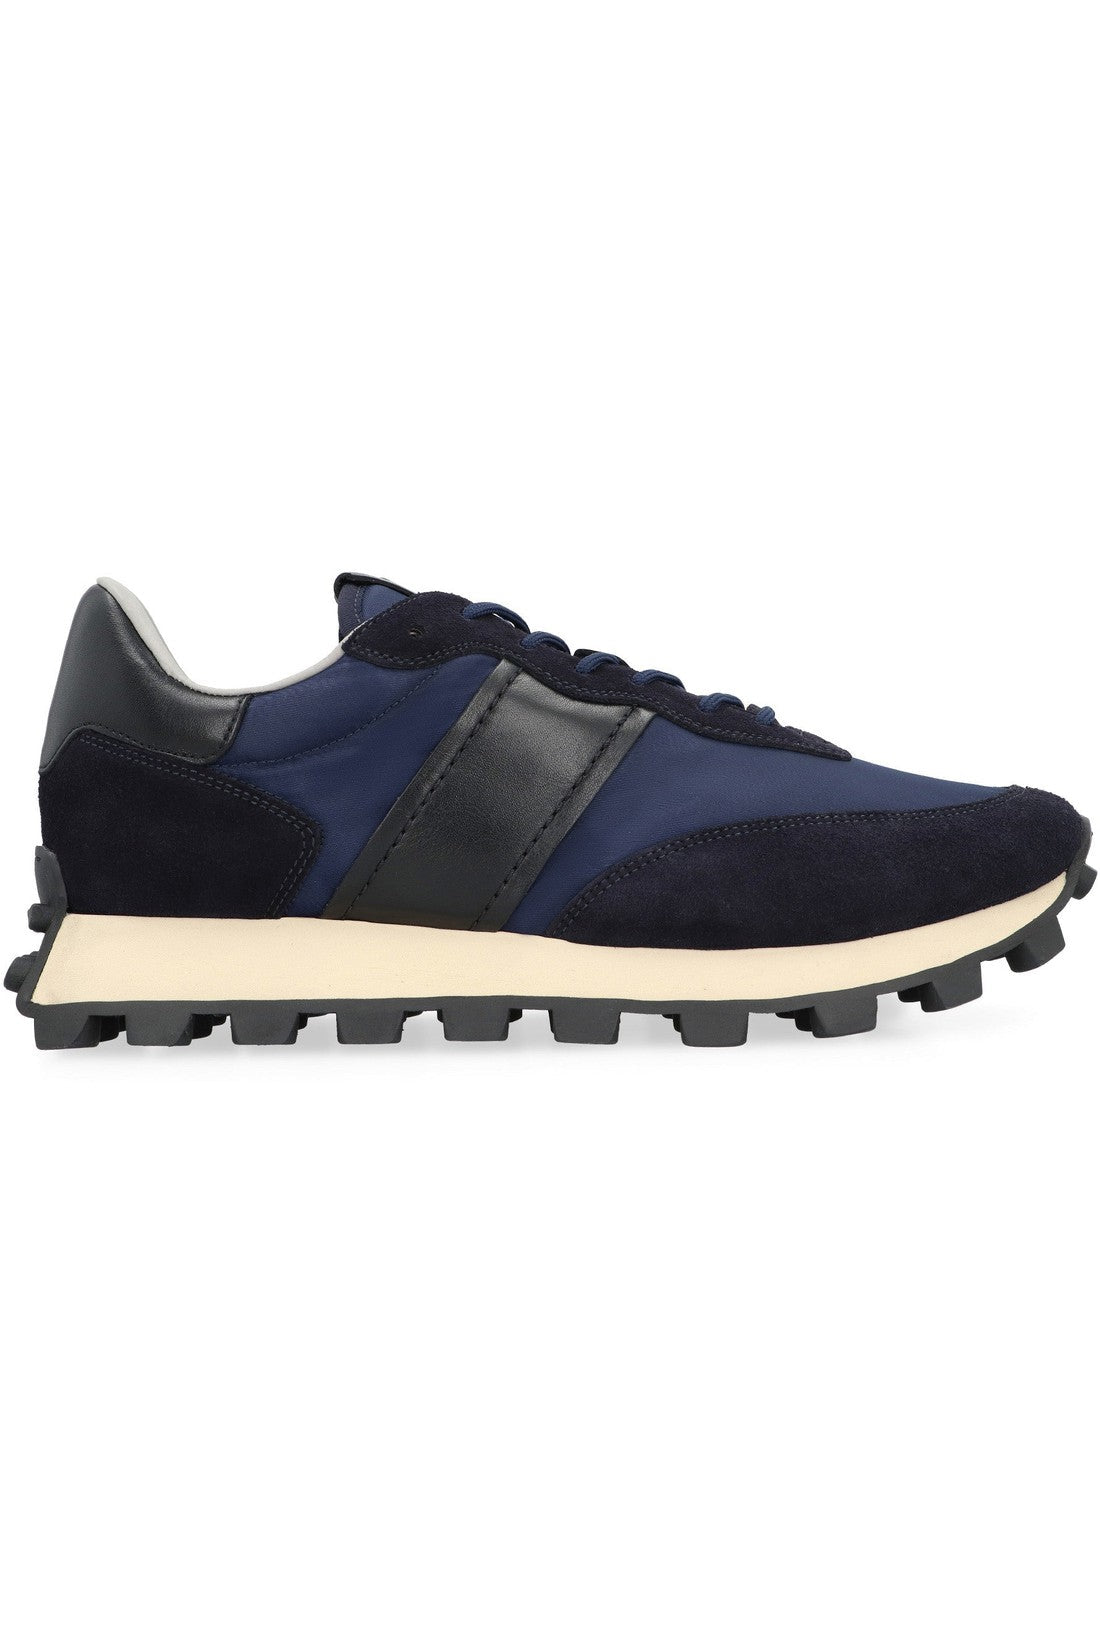 Tod's-OUTLET-SALE-Tod’s 1T Low-top sneakers-ARCHIVIST